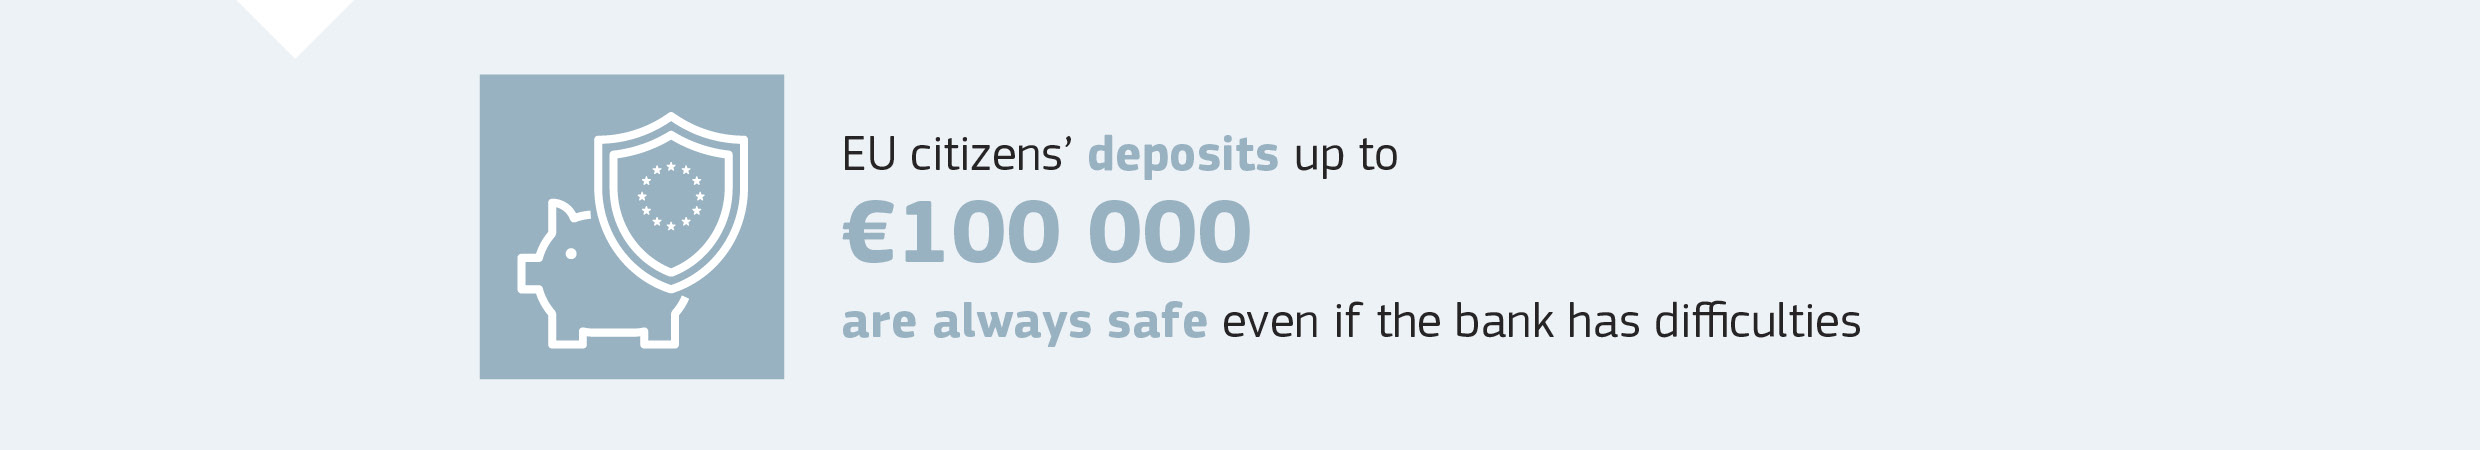 EU citizens’ deposits up to € 100 000 are always safe even if the bank has difficulties